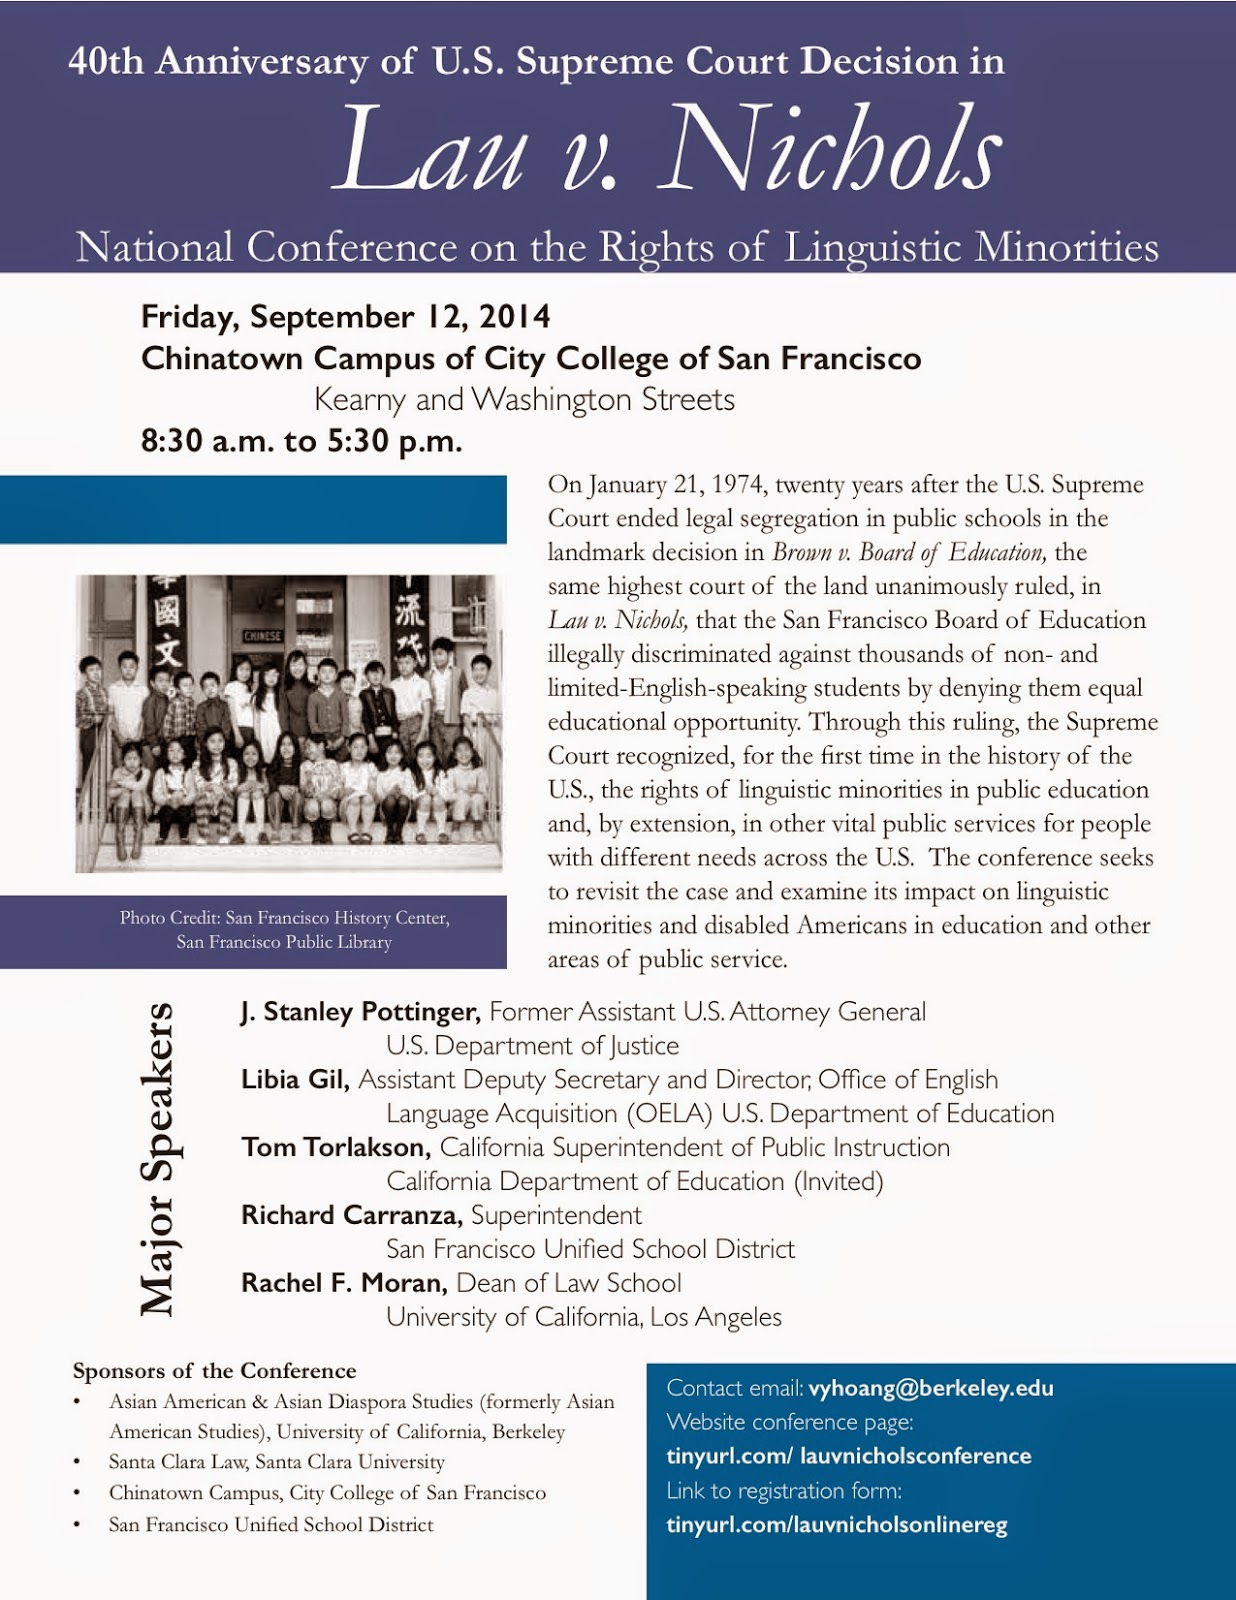 40th Anniversary of Lau v. Nichols Decision: A National Conference on the Rights of Linguistic Minorities